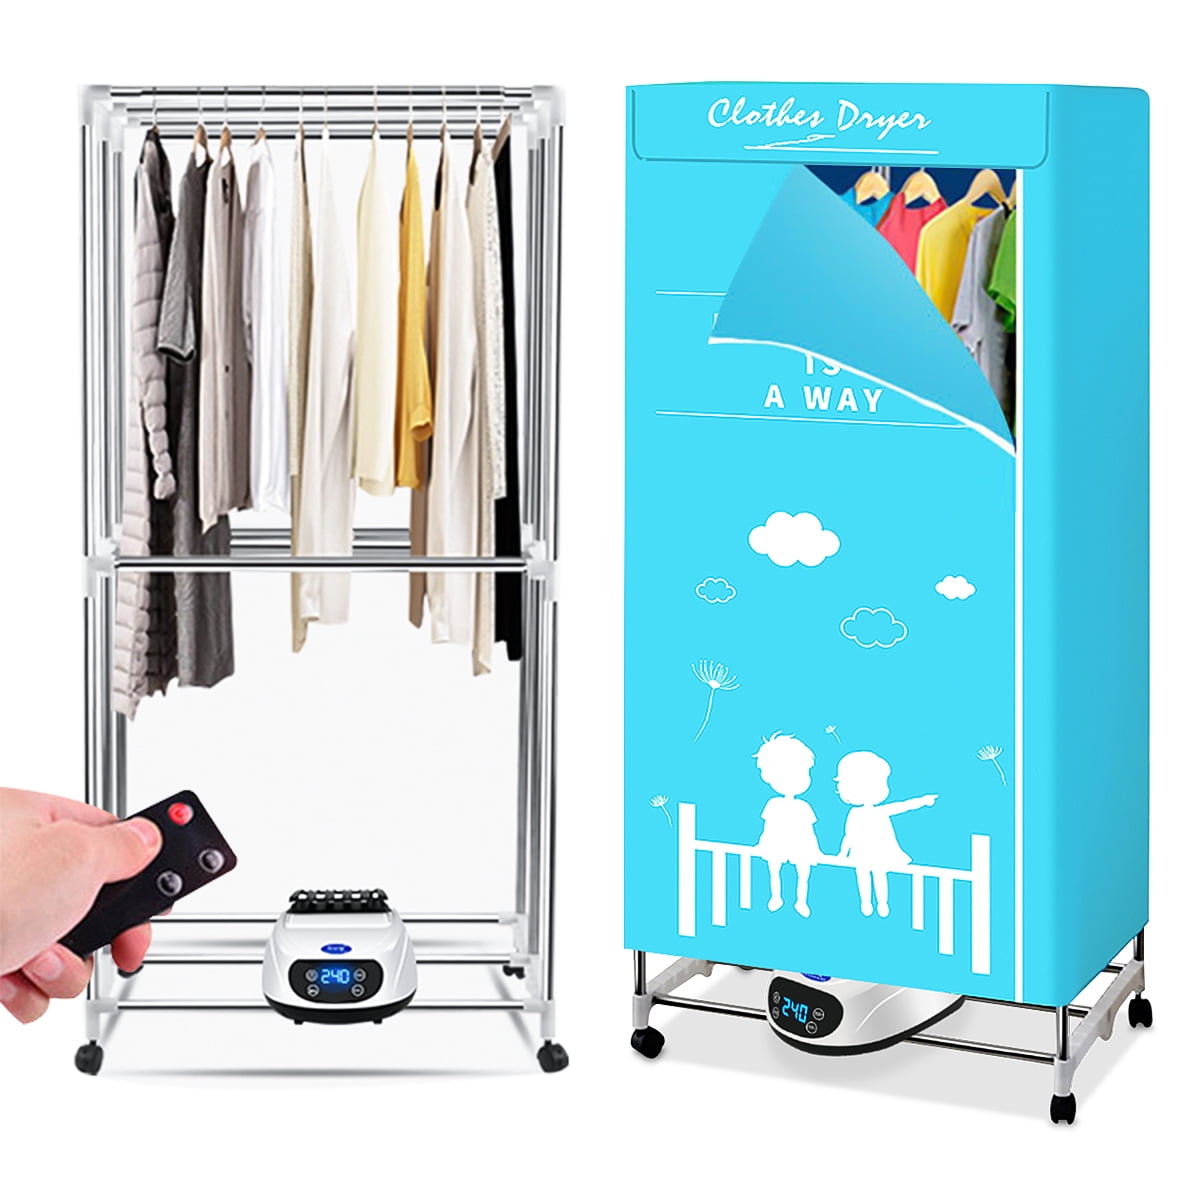 110-240V 1500W Foldable Electric Clothing Dryer Home Clothes Drying Portable